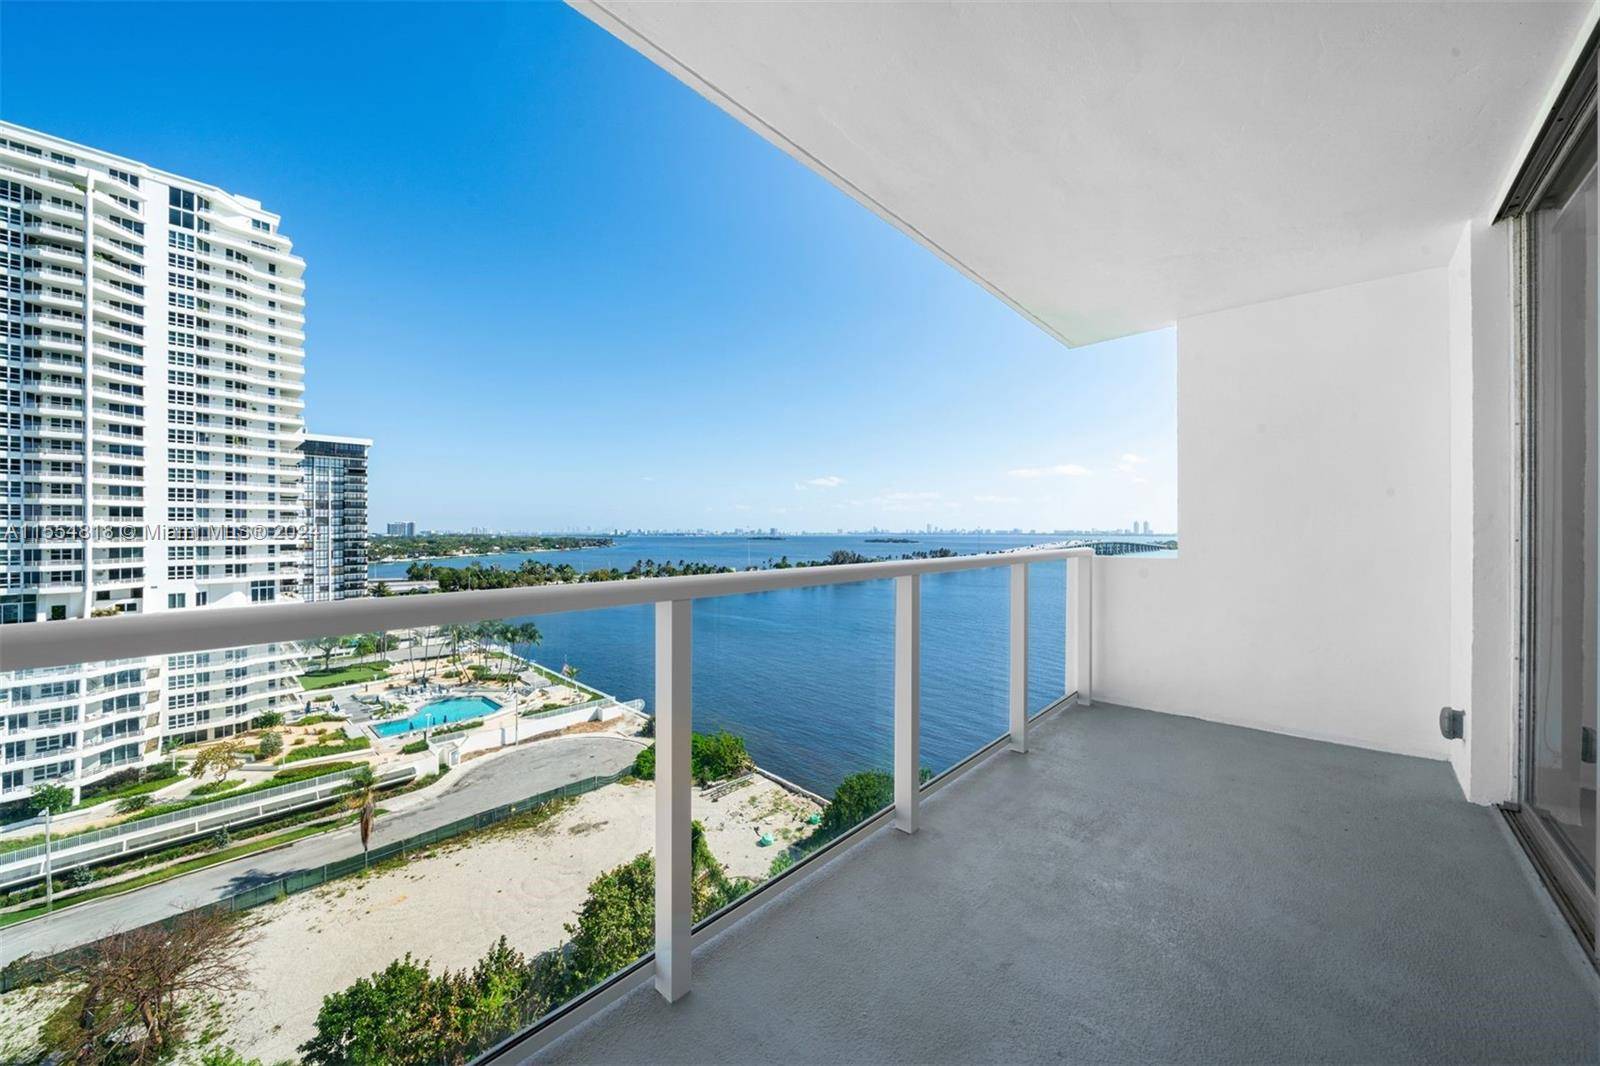 BEAUTIFULLY REMODELED WATERFRONT STUDIO WITH BREATHTAKING VIEWS OF BISCAYNE BAY IN THE HEART OF EDGEWATER NEIGHBORHOOD IN MIAMI.